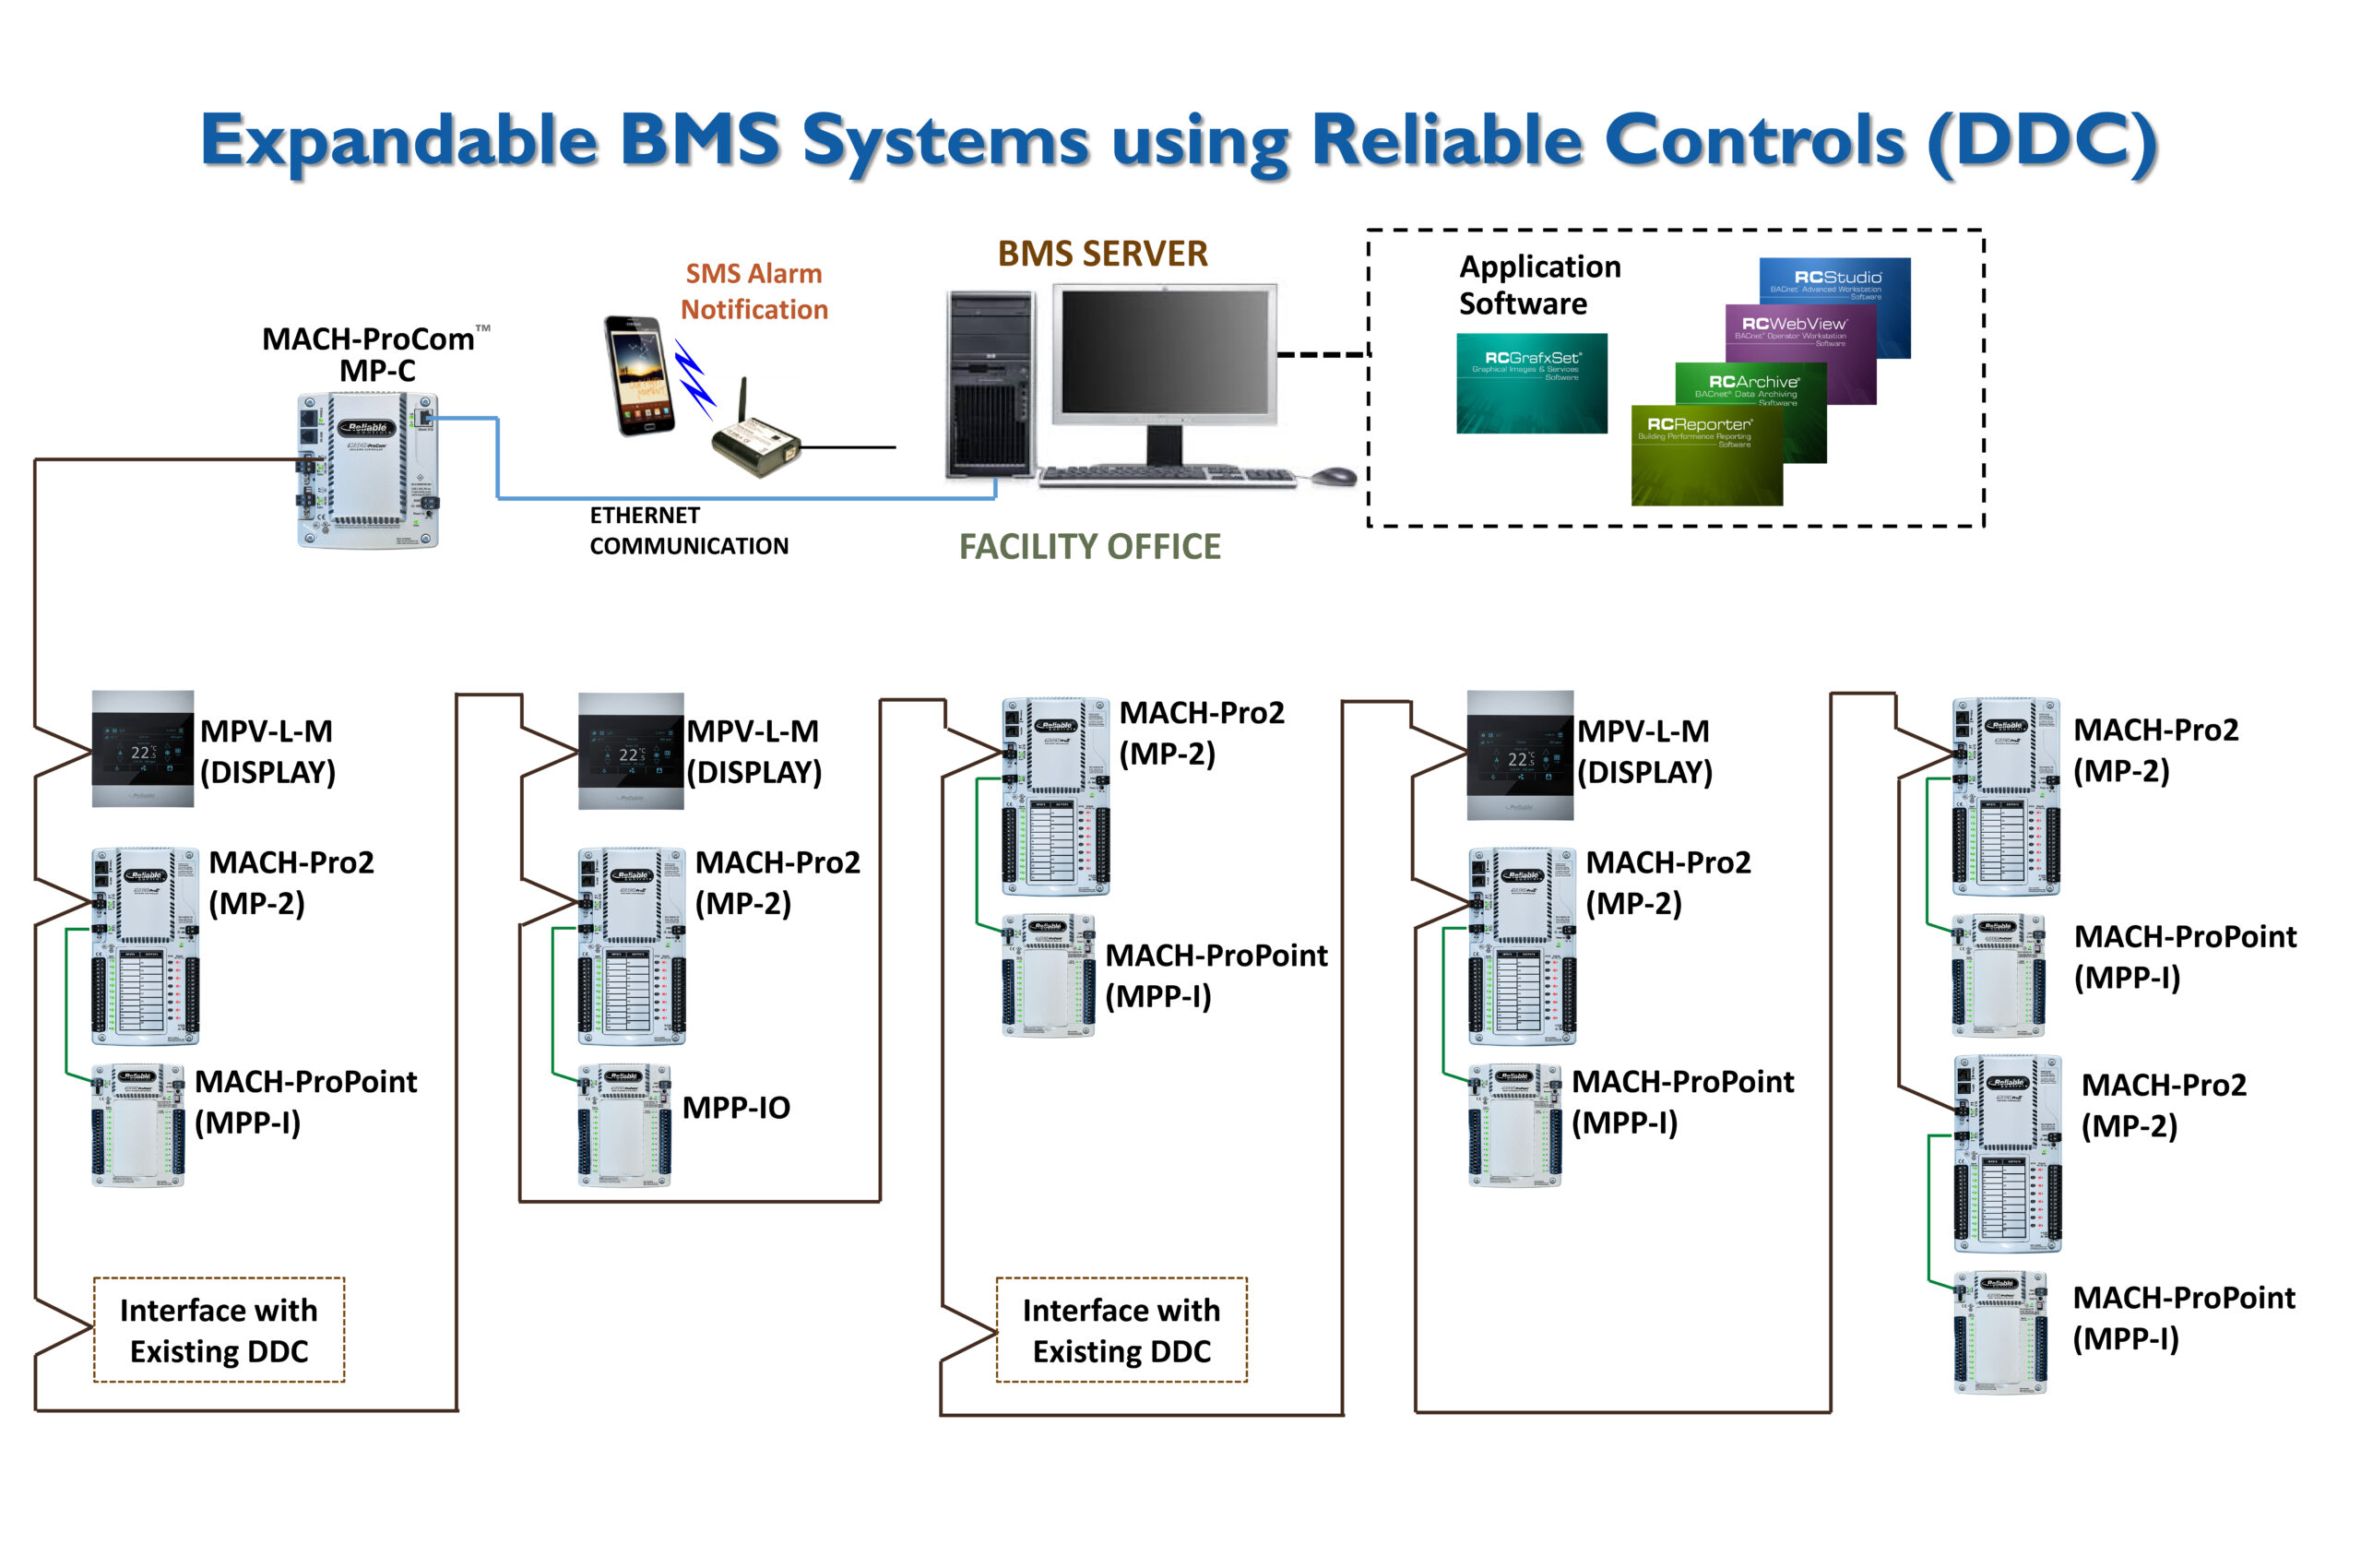 Expandable BMS Systems using Reliable Controls (DDC) 2